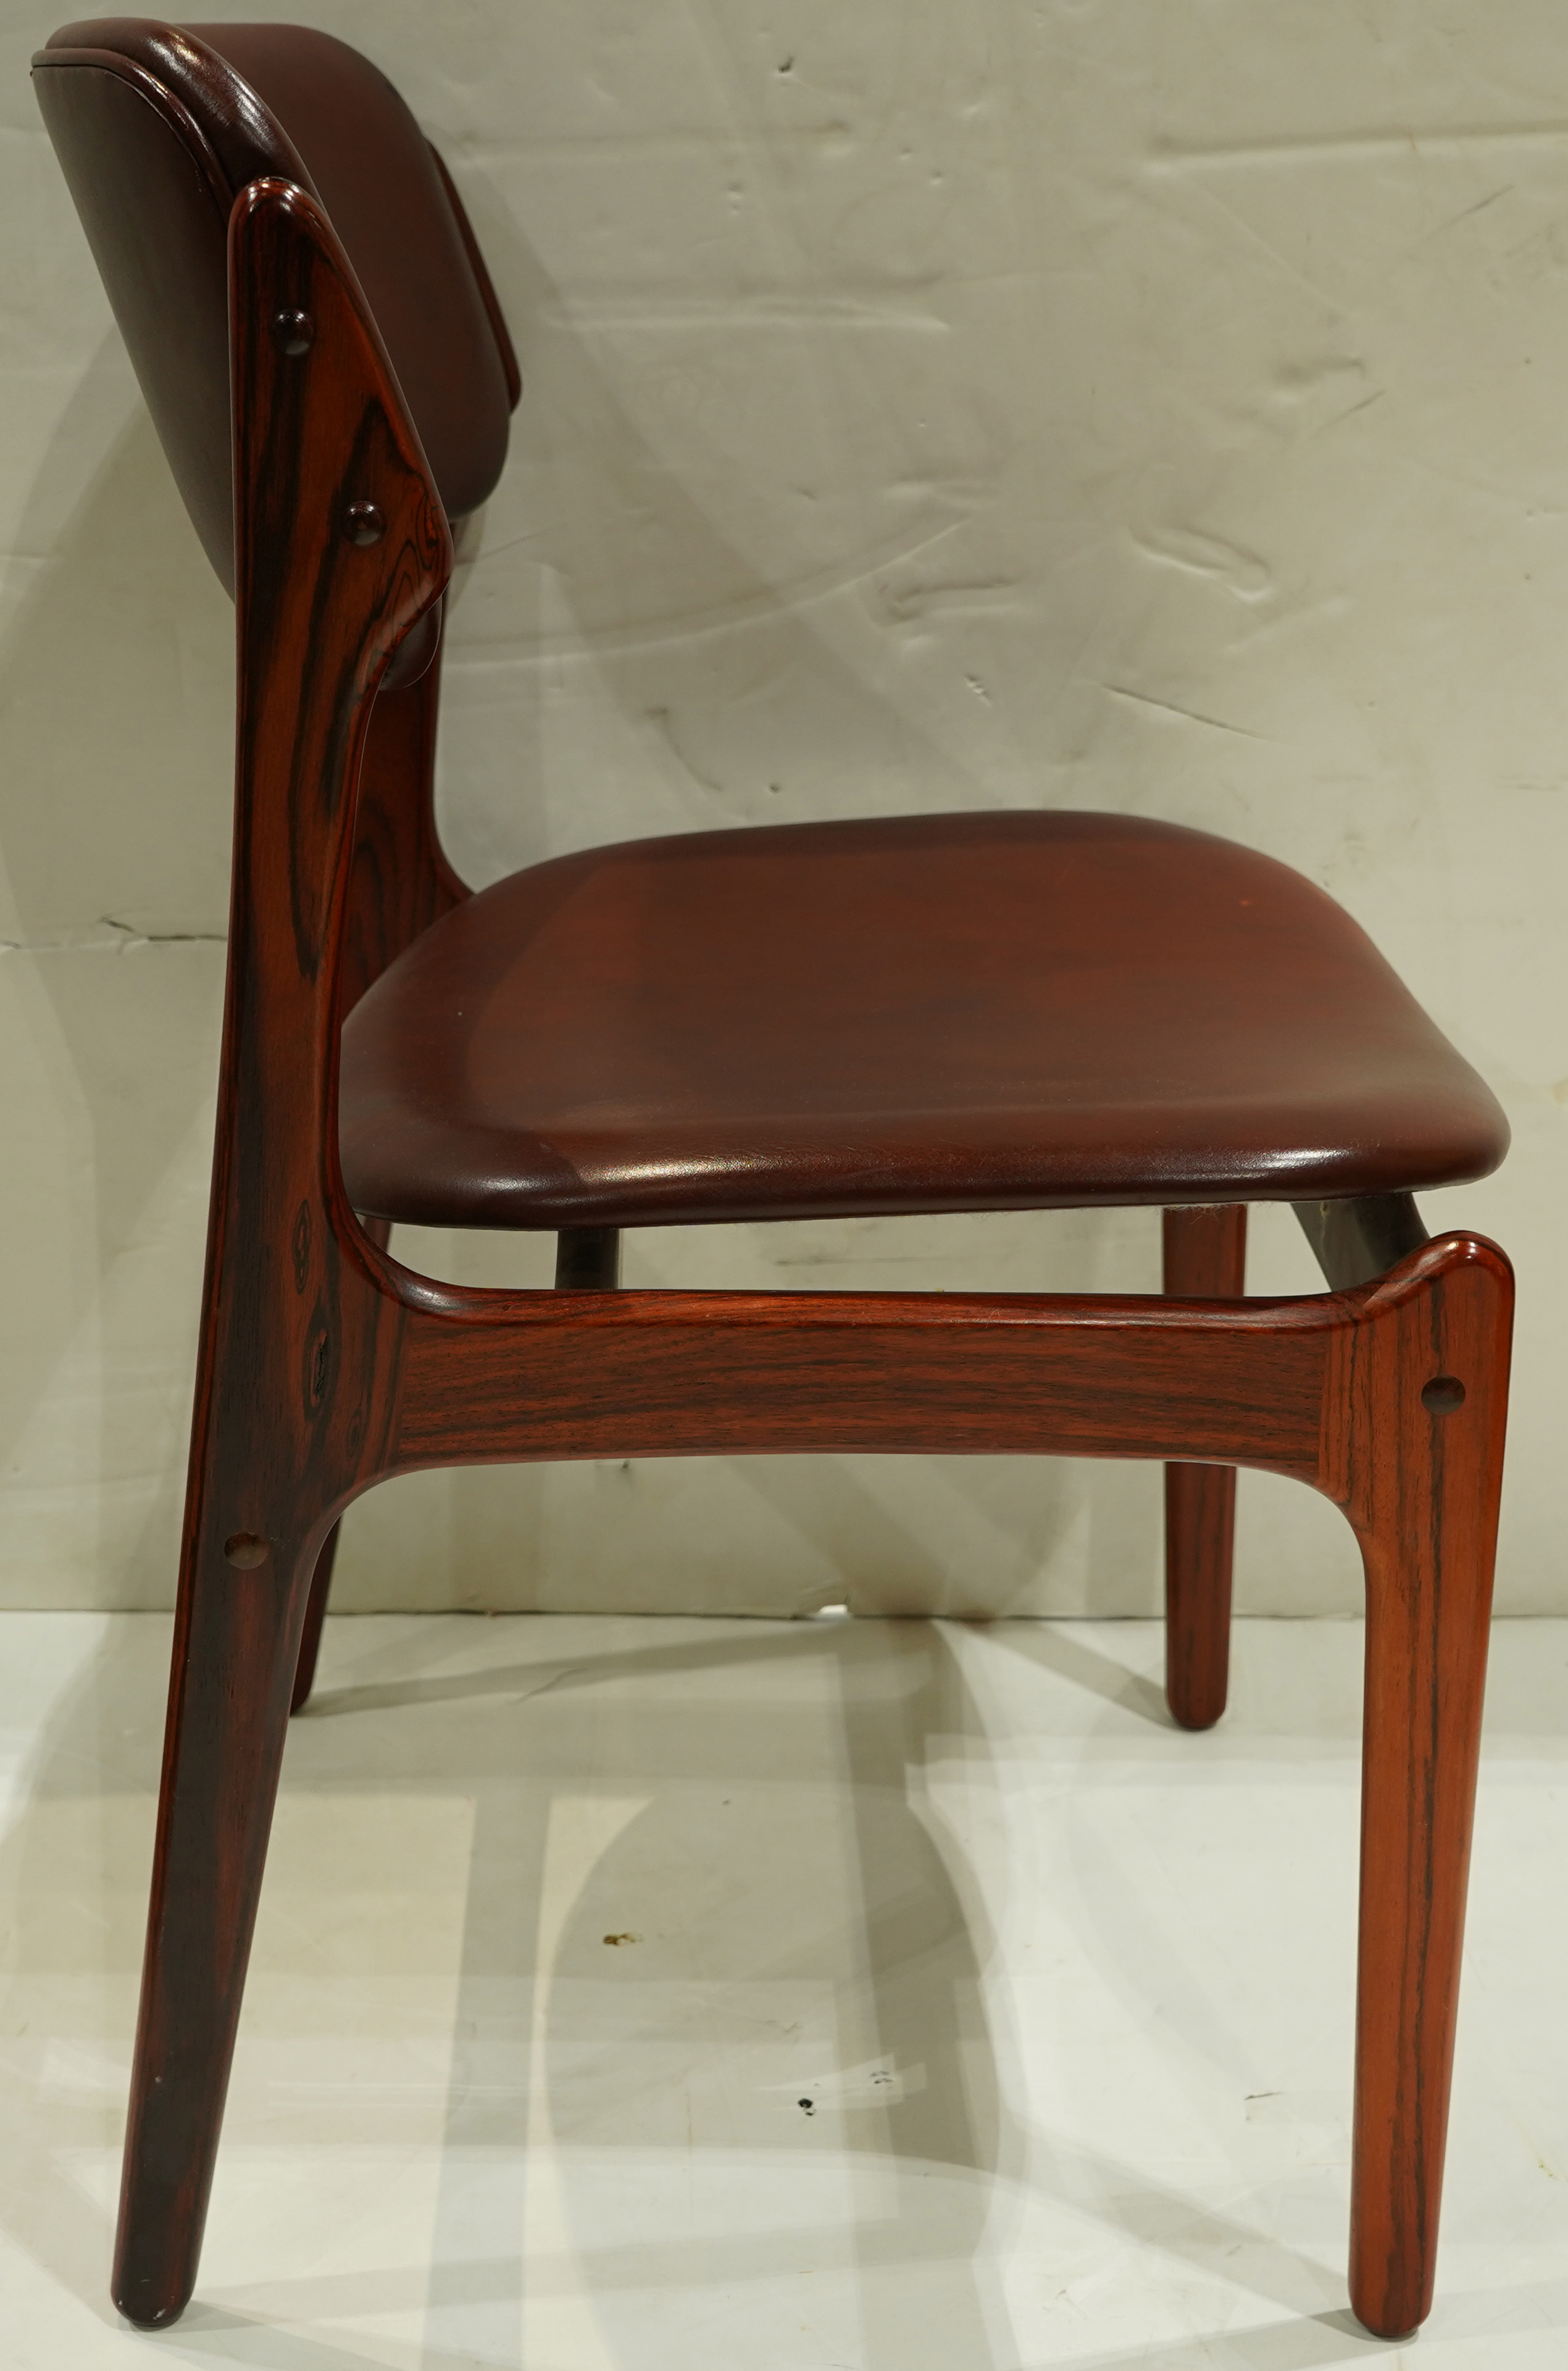 A group of Erik Buch Danish Modern rosewood chairs, model 49 - Image 4 of 5